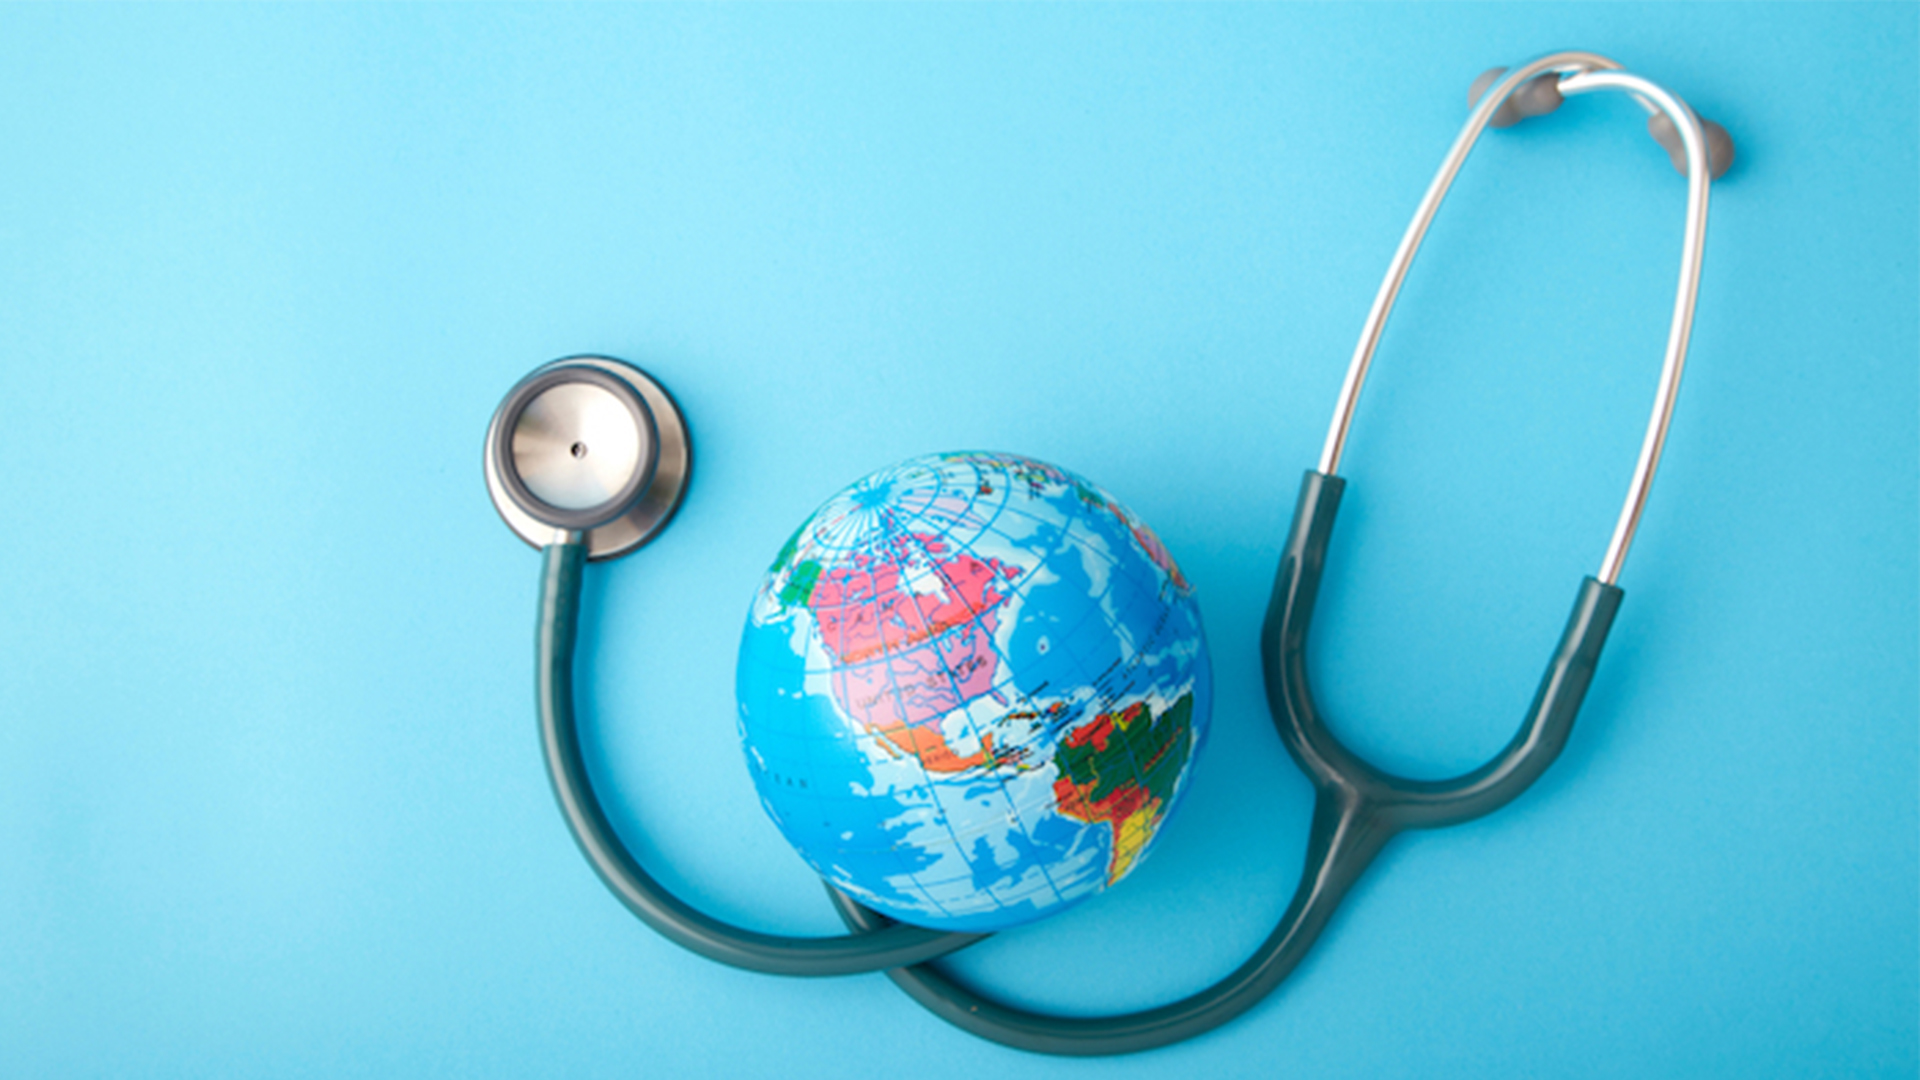 Global healthcare spending expected to reach over $10 trillion by 2024 on  account of COVID-19 - Healthcare Radius